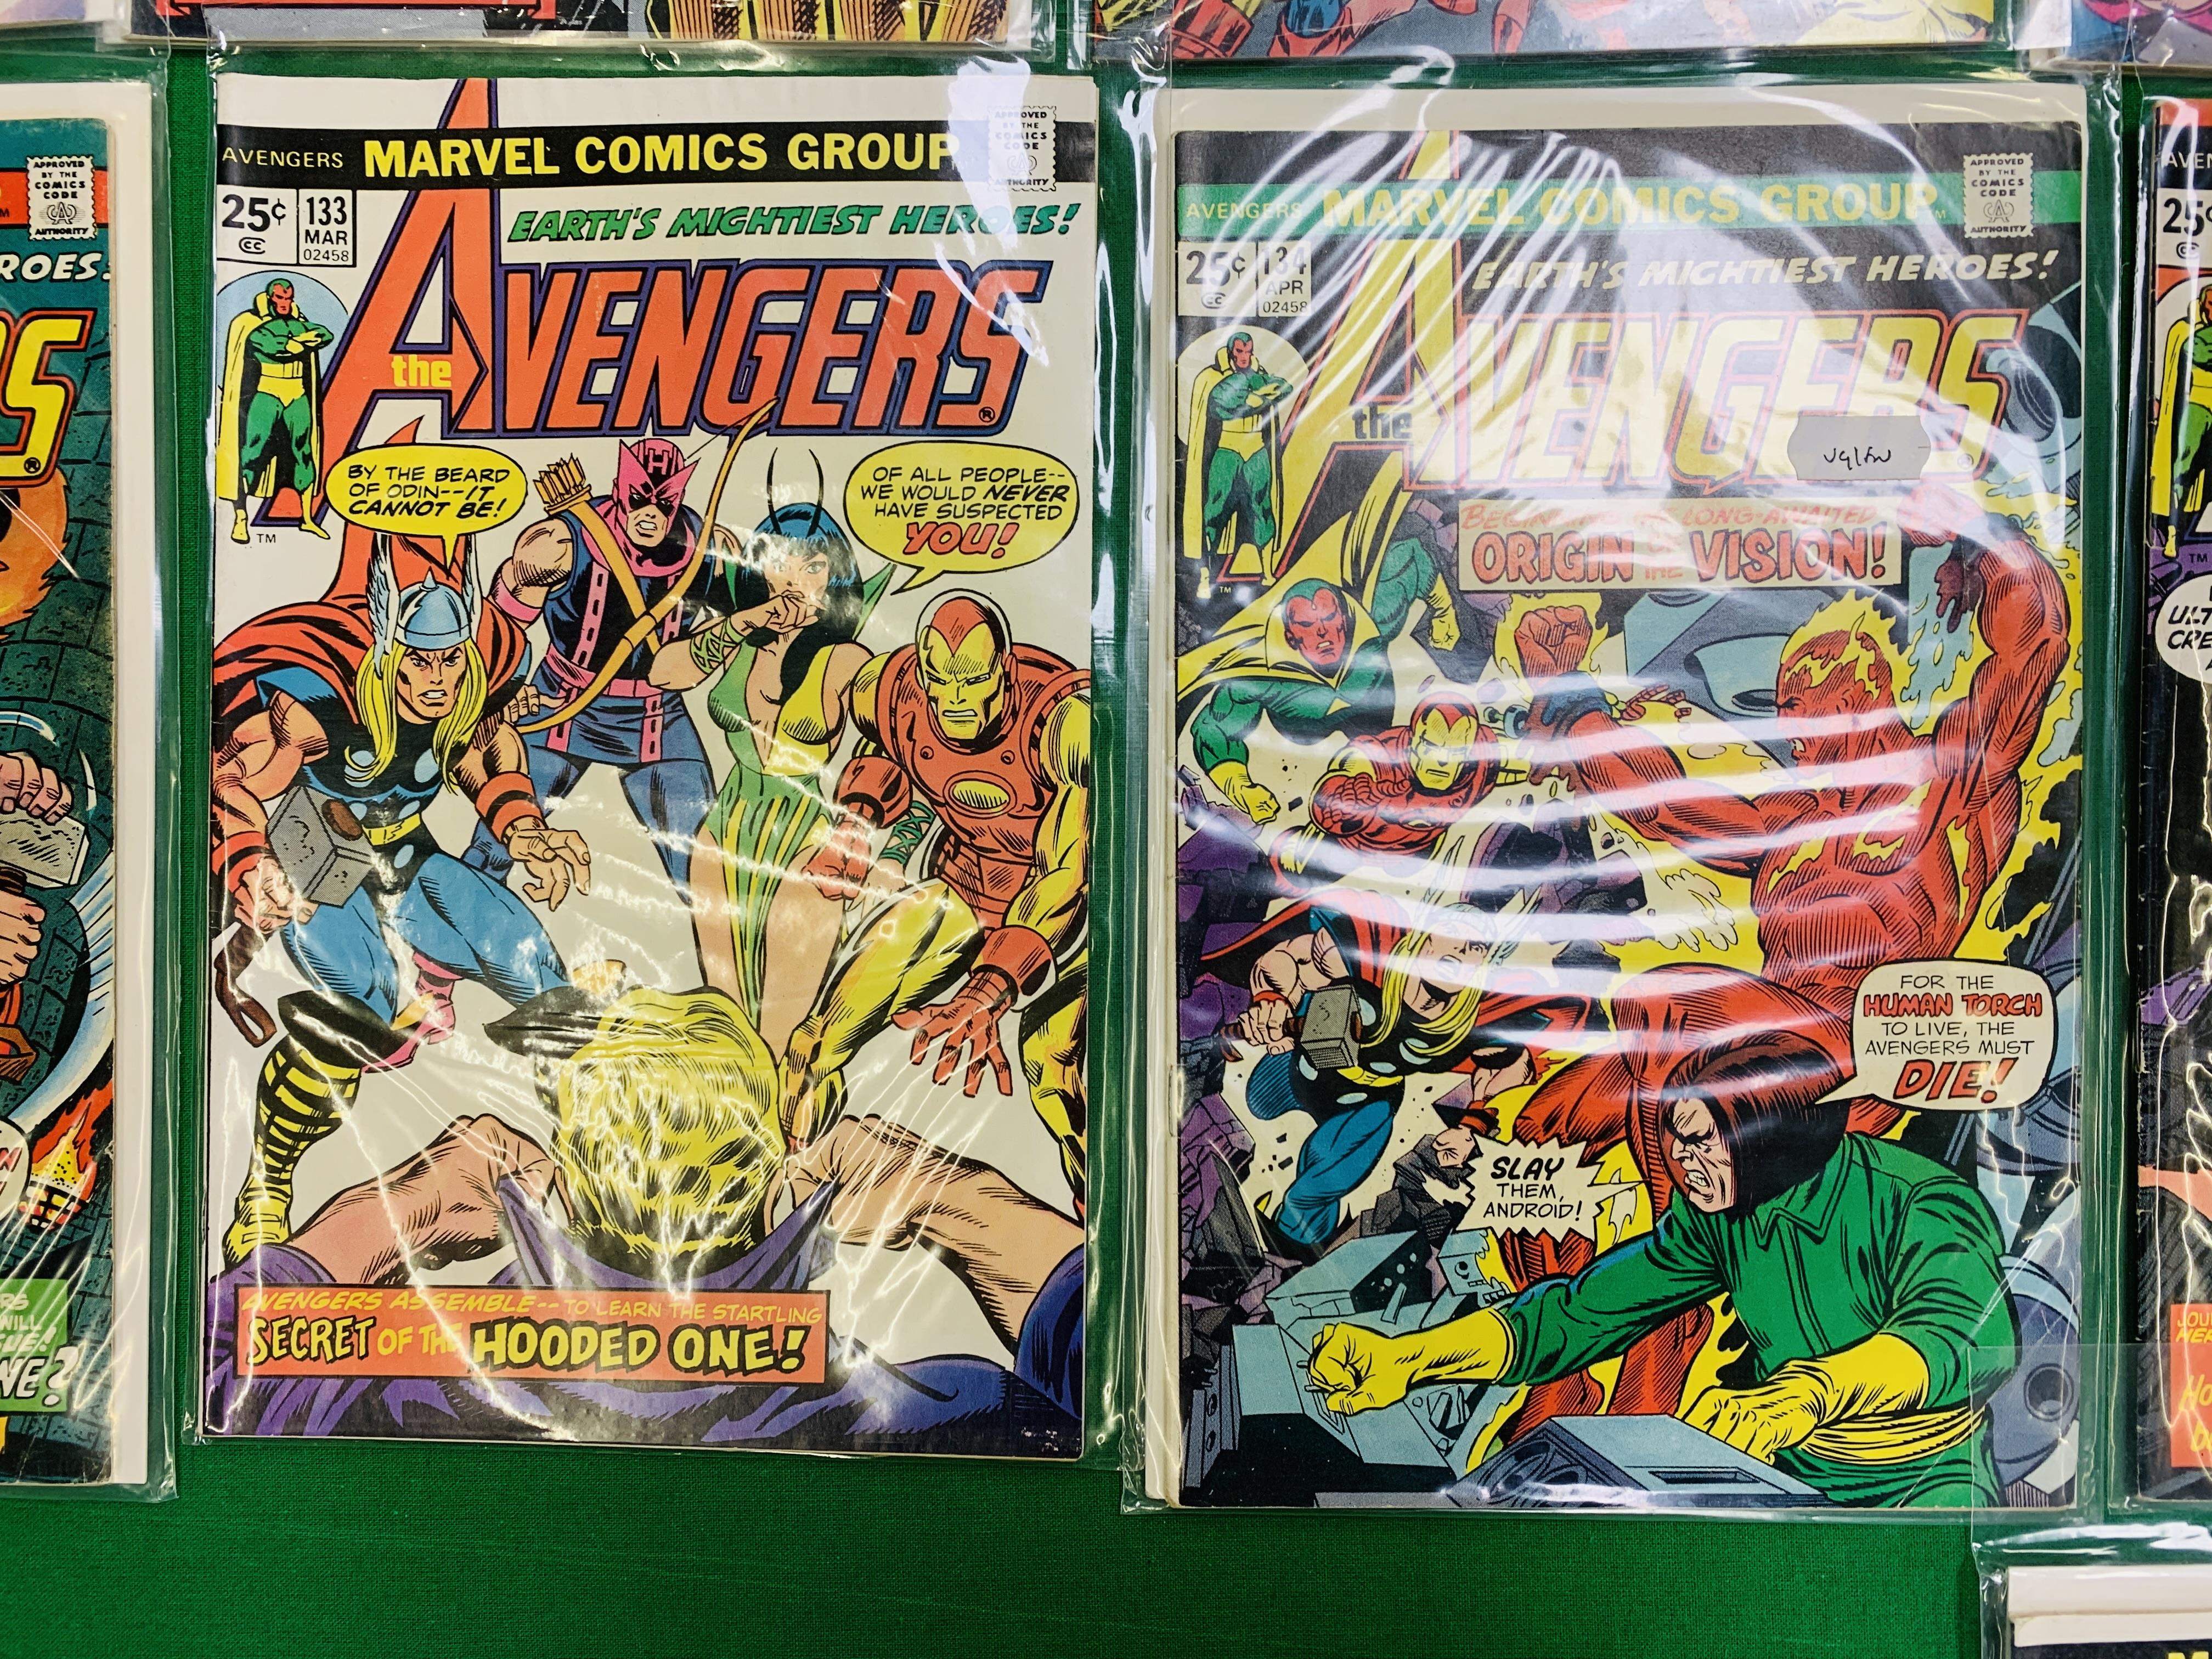 MARVEL COMICS THE AVENGERS NO. 101 - 299, MISSING ISSUES 103 AND 110. - Image 23 of 130